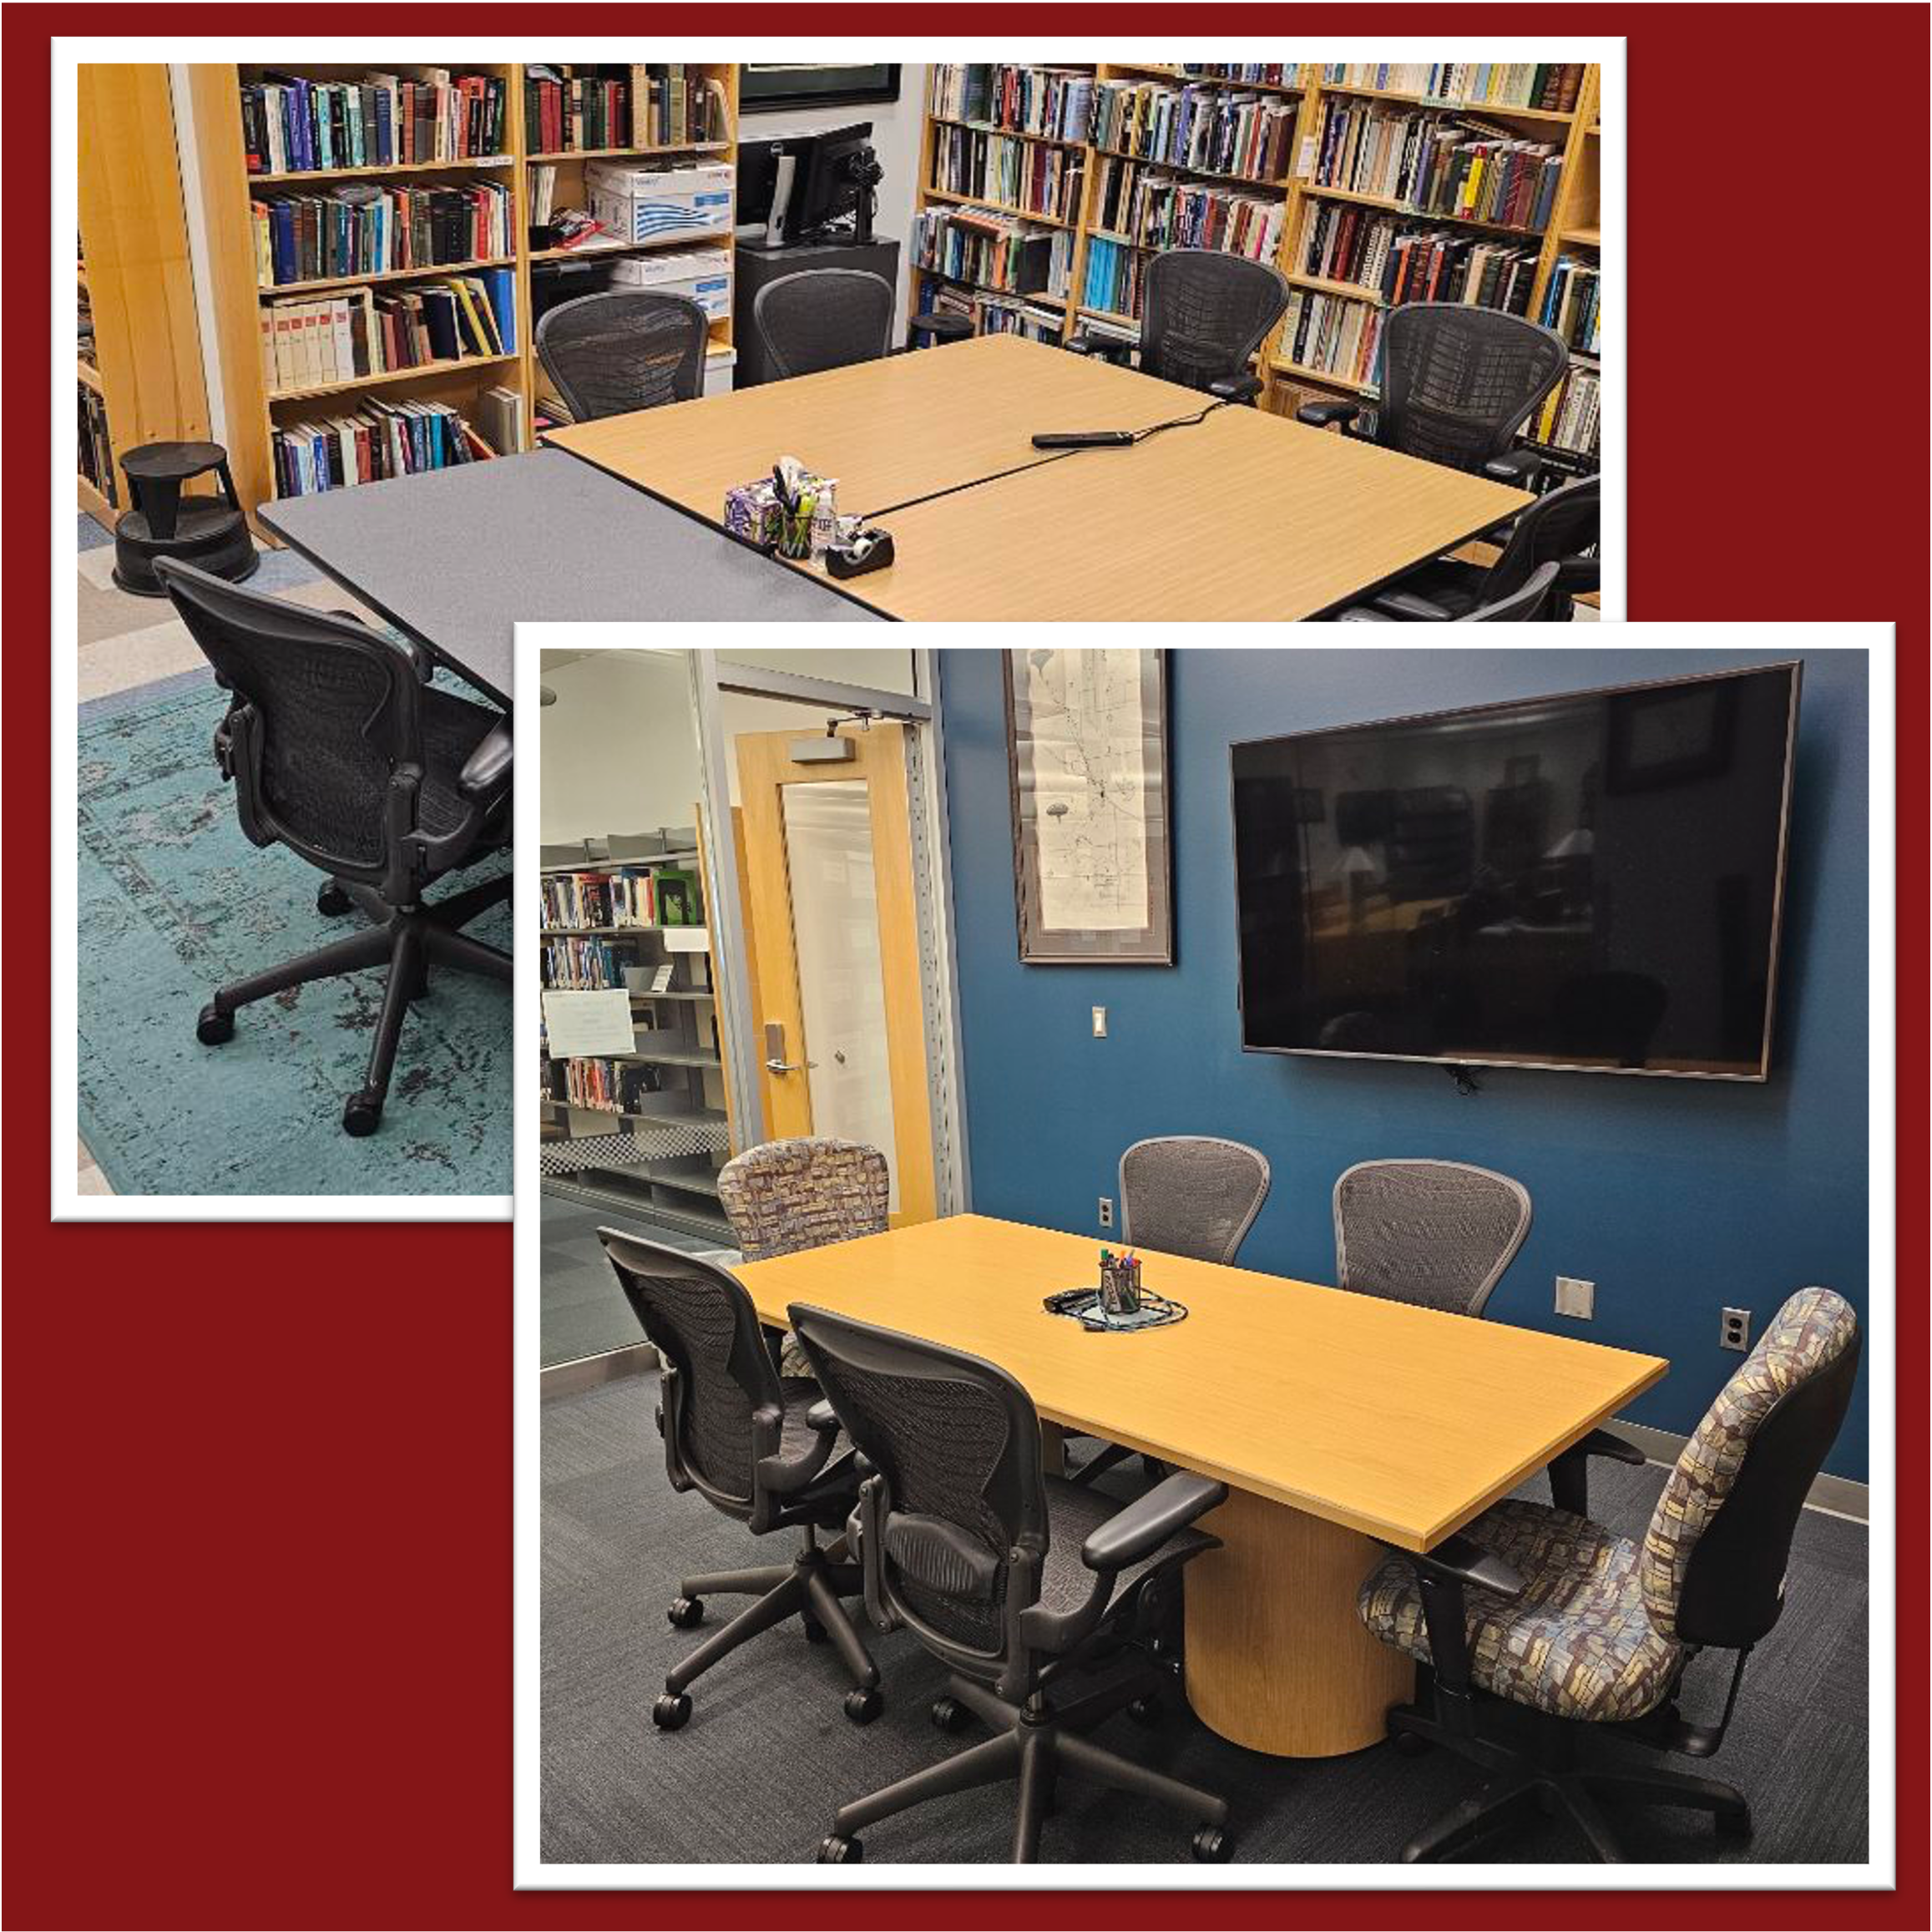 Images of two conference rooms - each with a table and chairs.